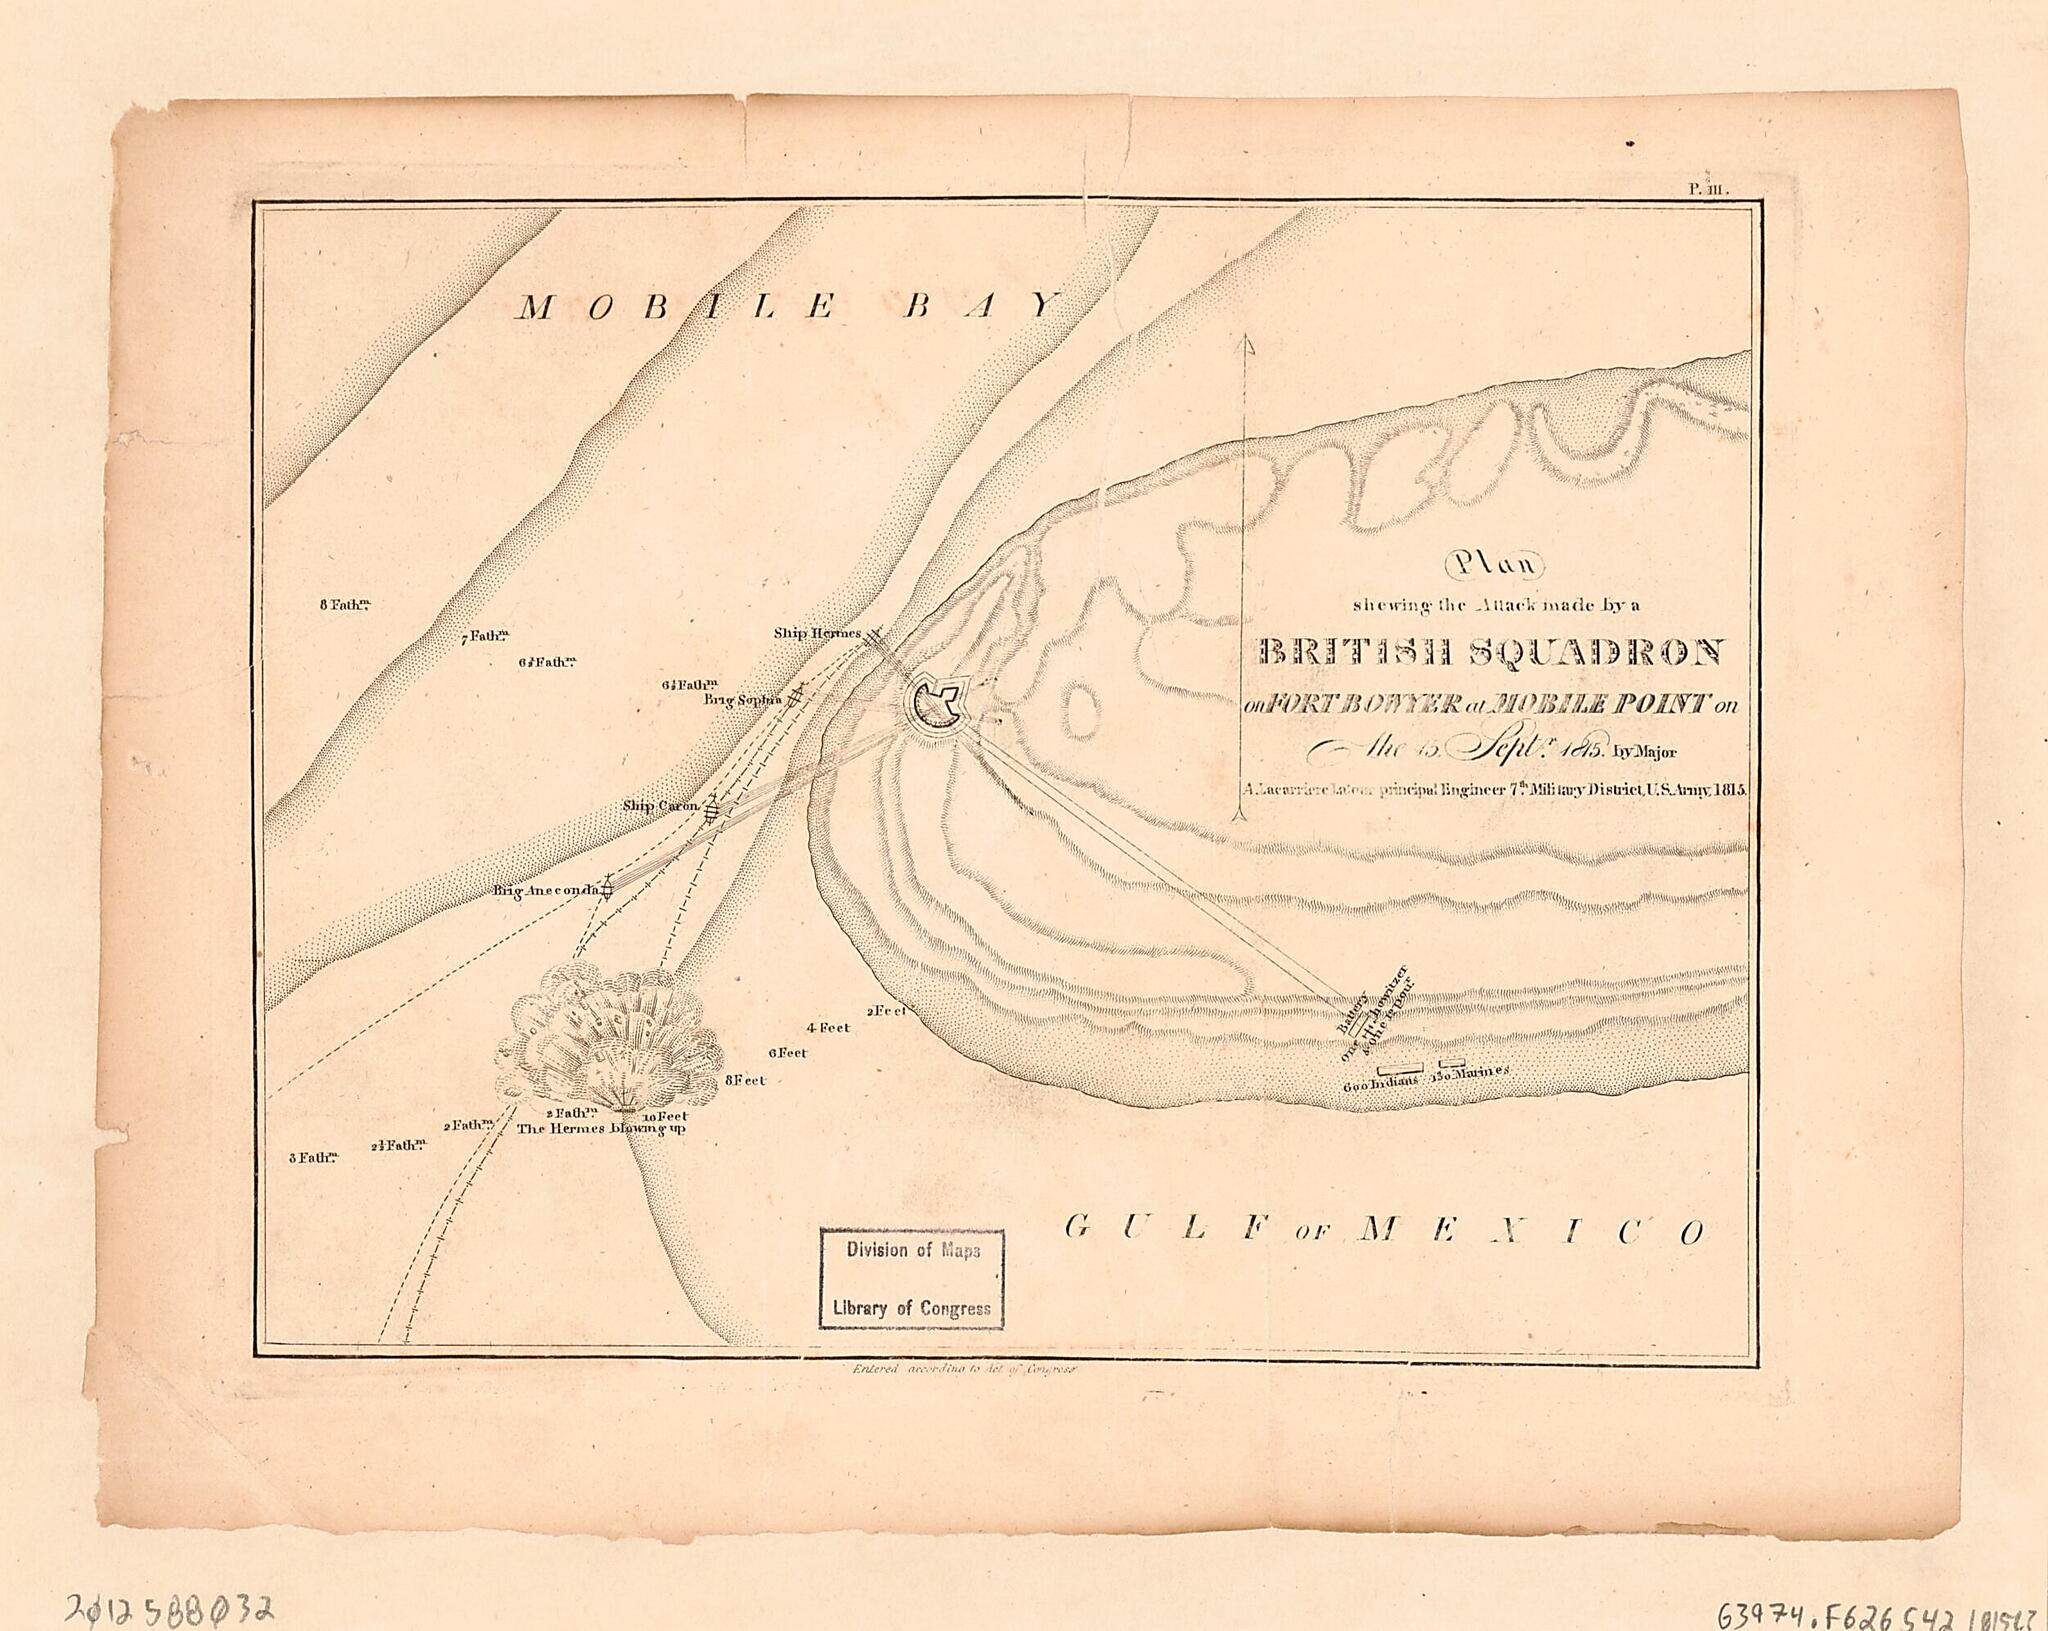 This old map of Plan Shewing the Attack Made by a British Squadron On Fort Bowyer at Mobile Point On the 15 Septr. from 1815 was created by Arsène Lacarrière Latour in 1815